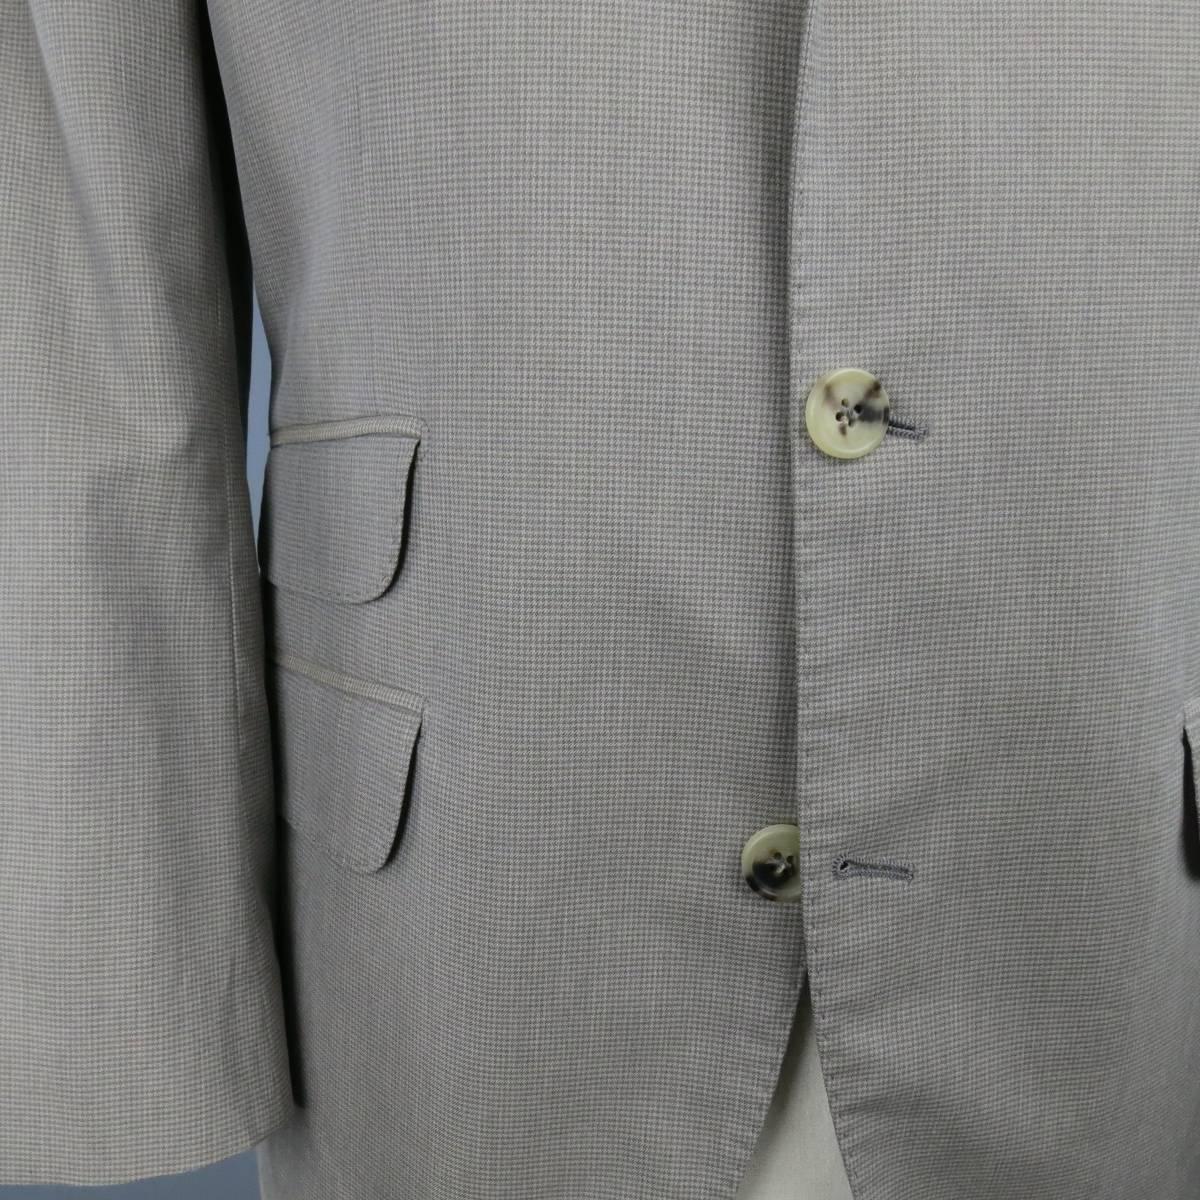 BRUNELLO CUCINELLI Sport Coat consists of cotton material in a taupe color tone. Designed in a notch lapel collar, 3-button front and houndstooth pattern. Detailed with top pocket square and bottom flap pockets. 4-button cuffs and double back vent.